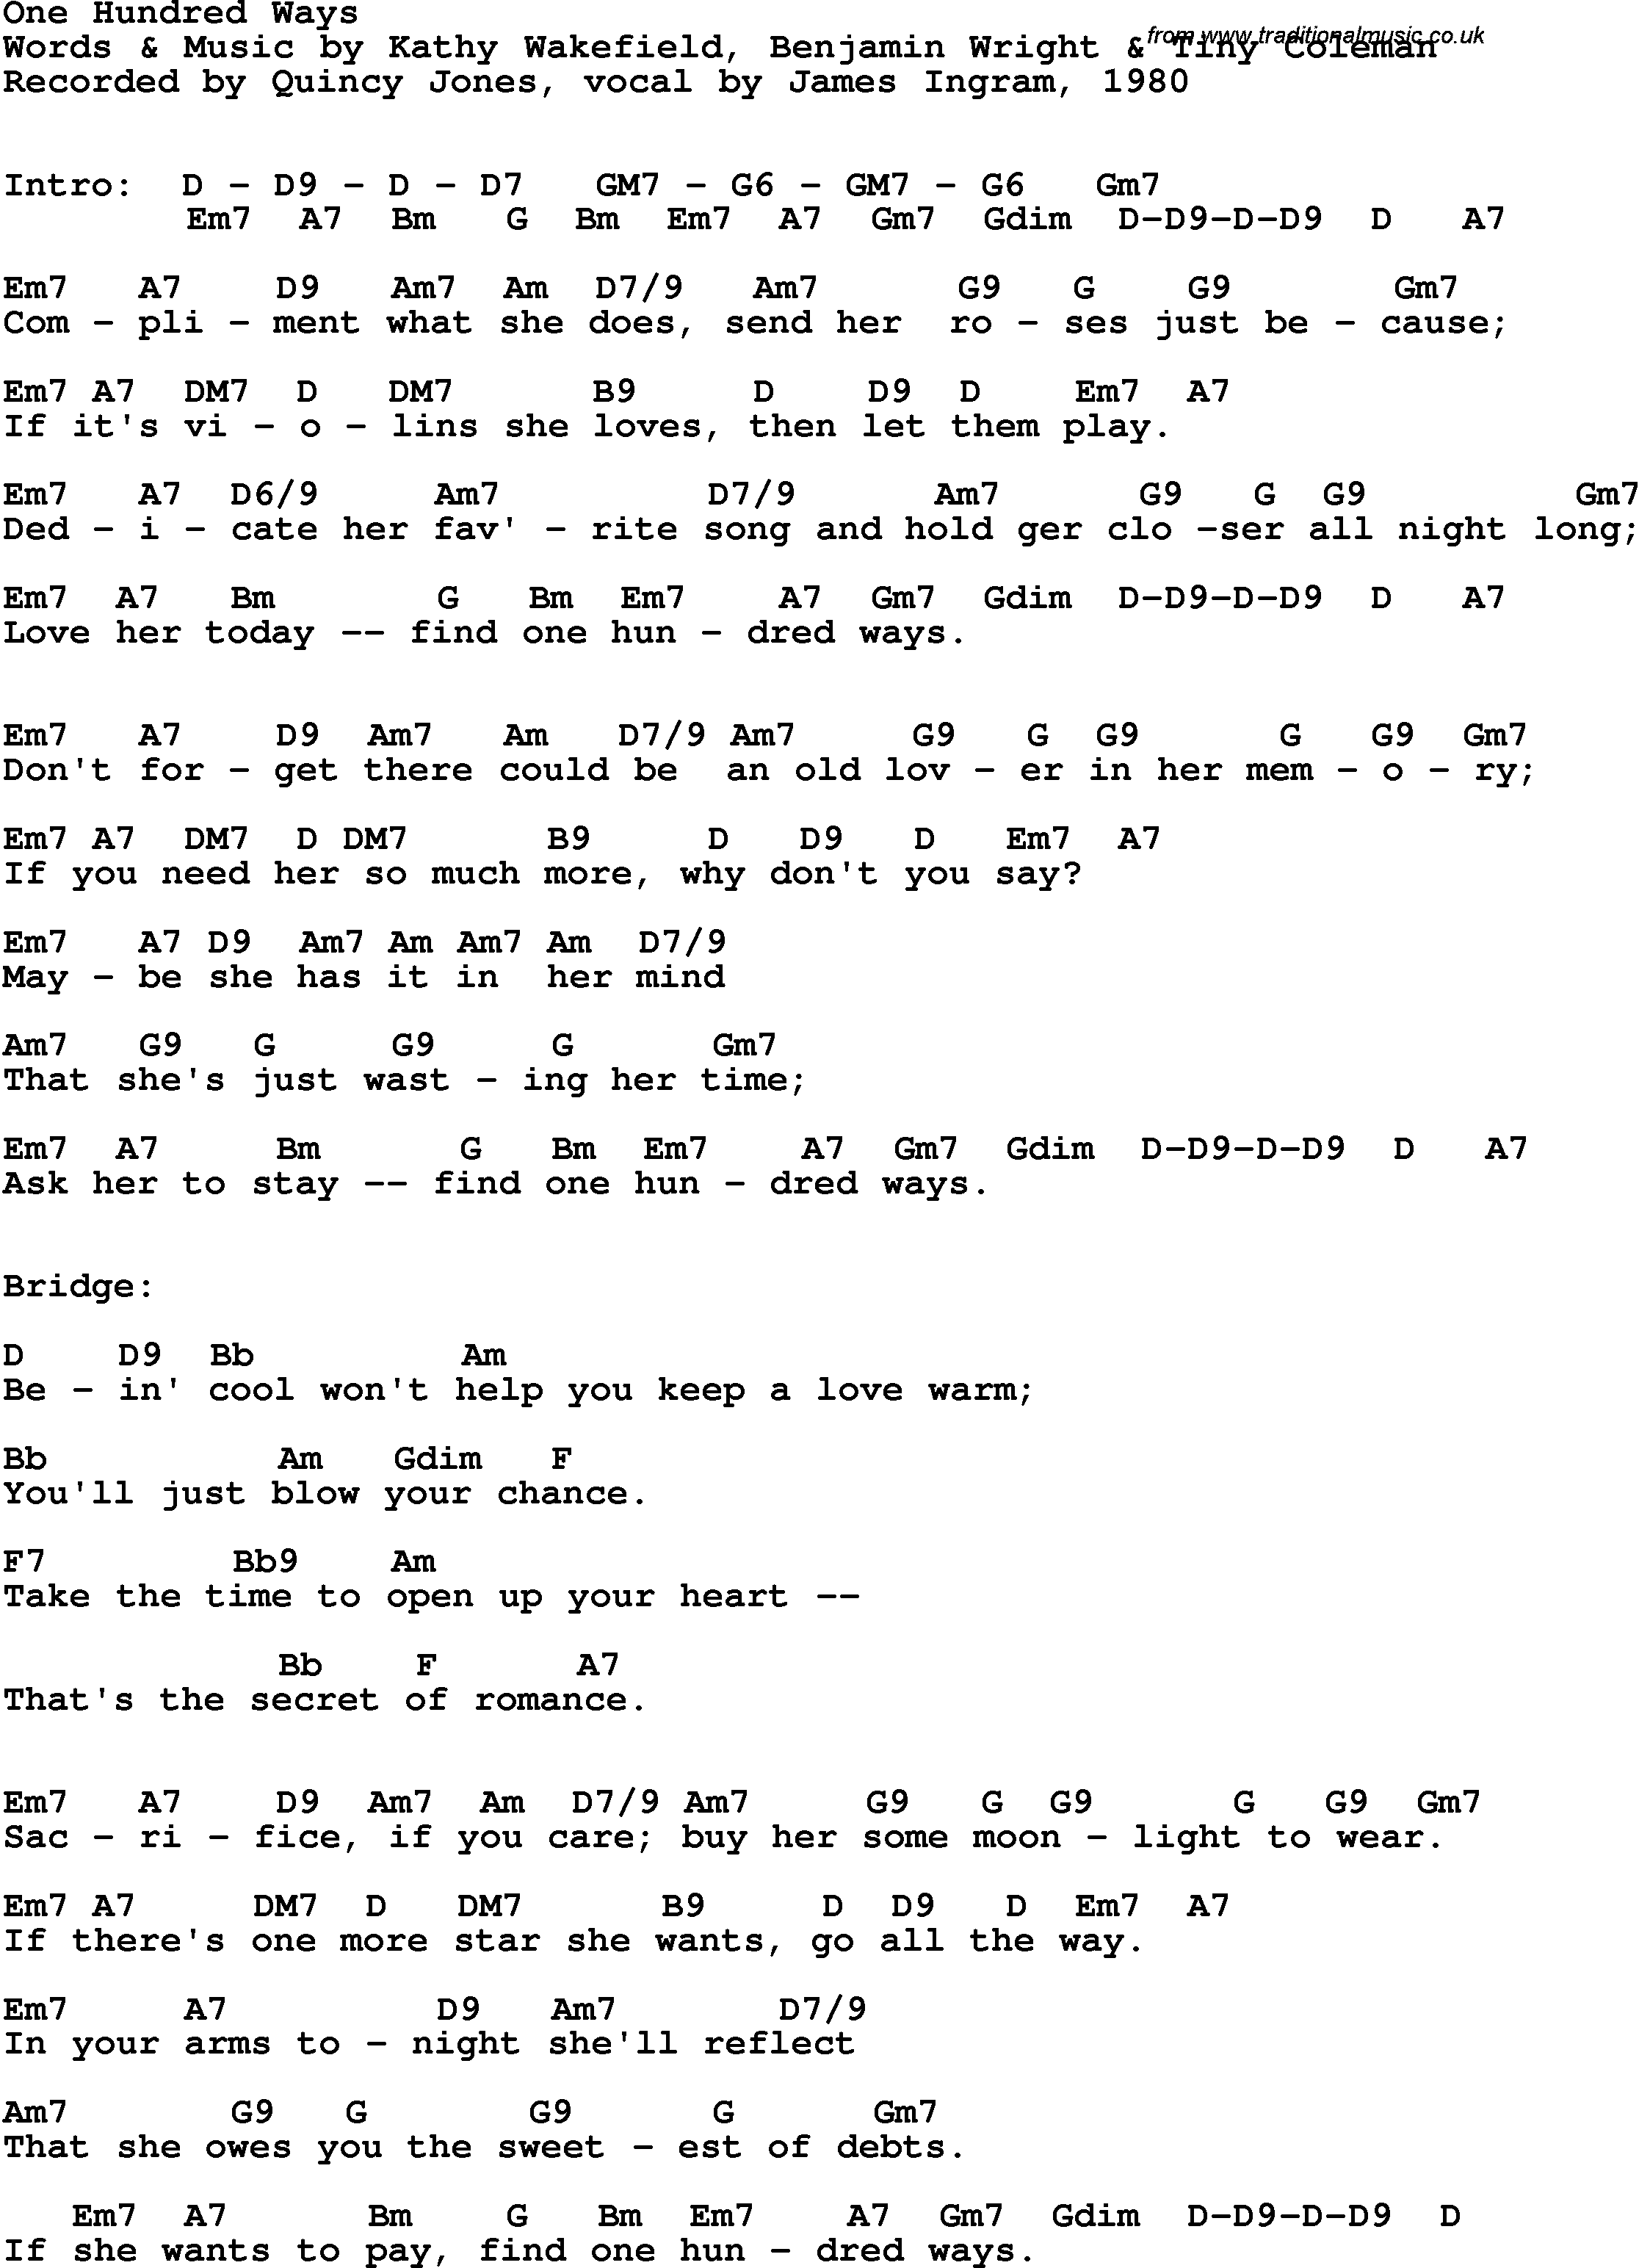 Song Lyrics with guitar chords for One Hundred Ways - Quincy Jones, 1980, James Ingram Vocal